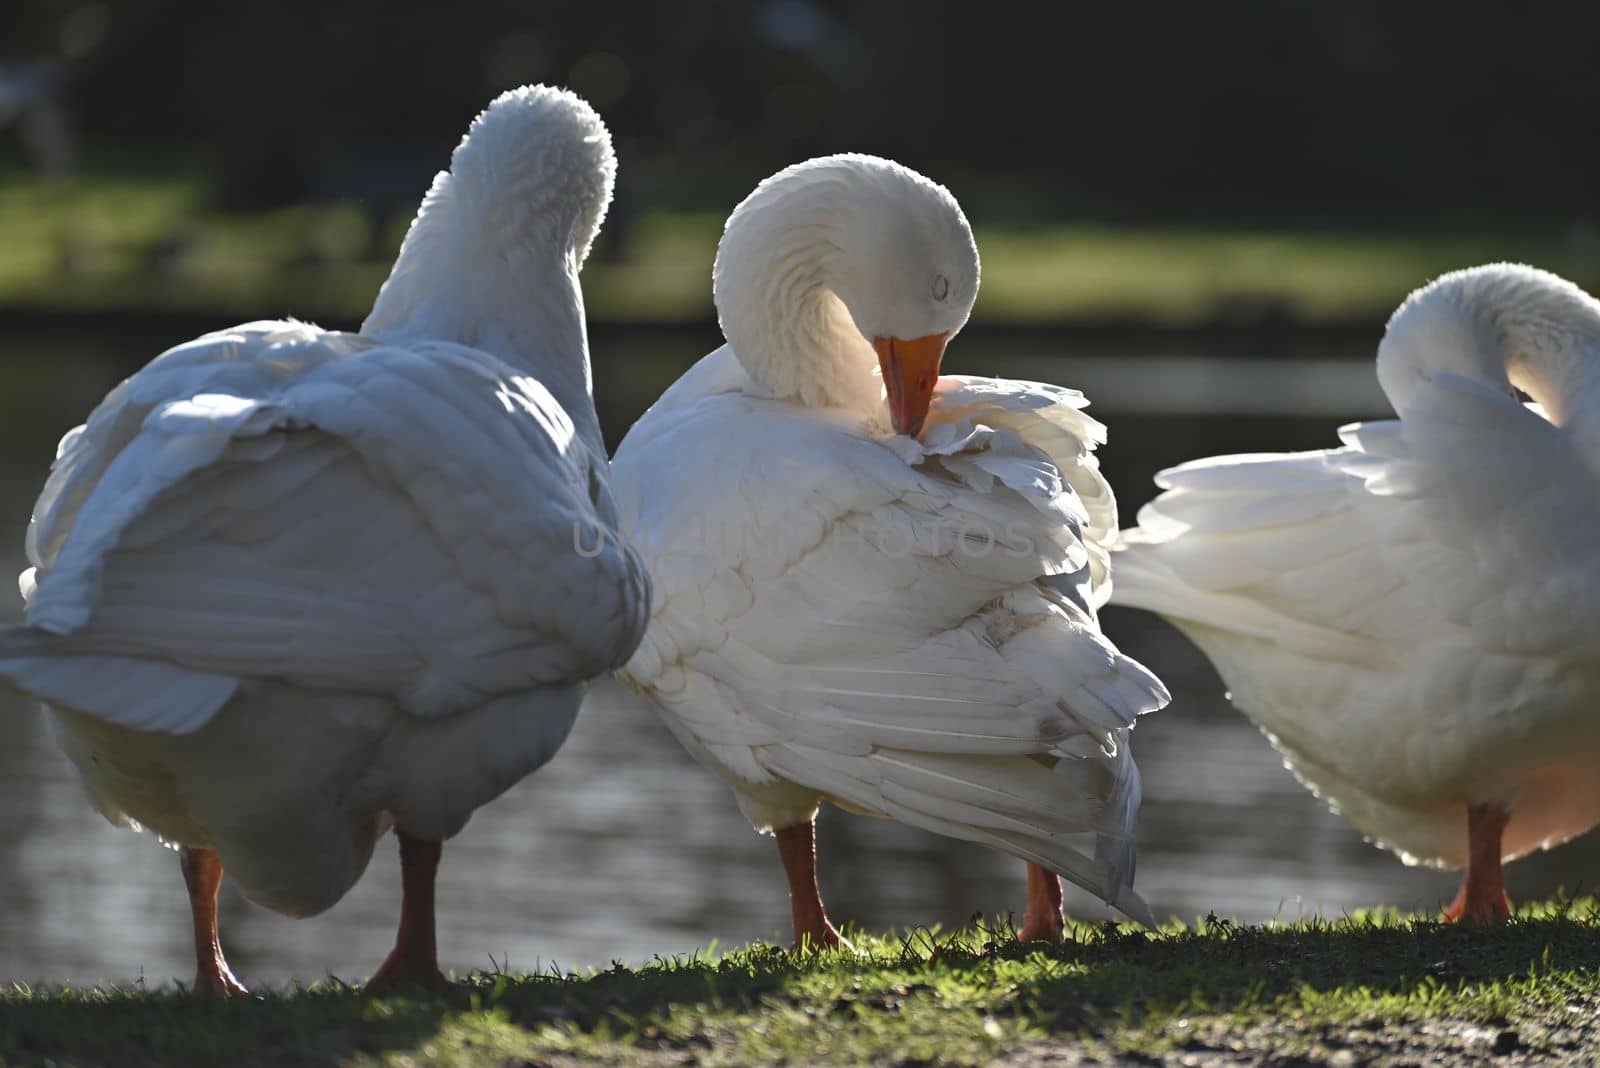 White geese grooming their feathers in a park near a pond